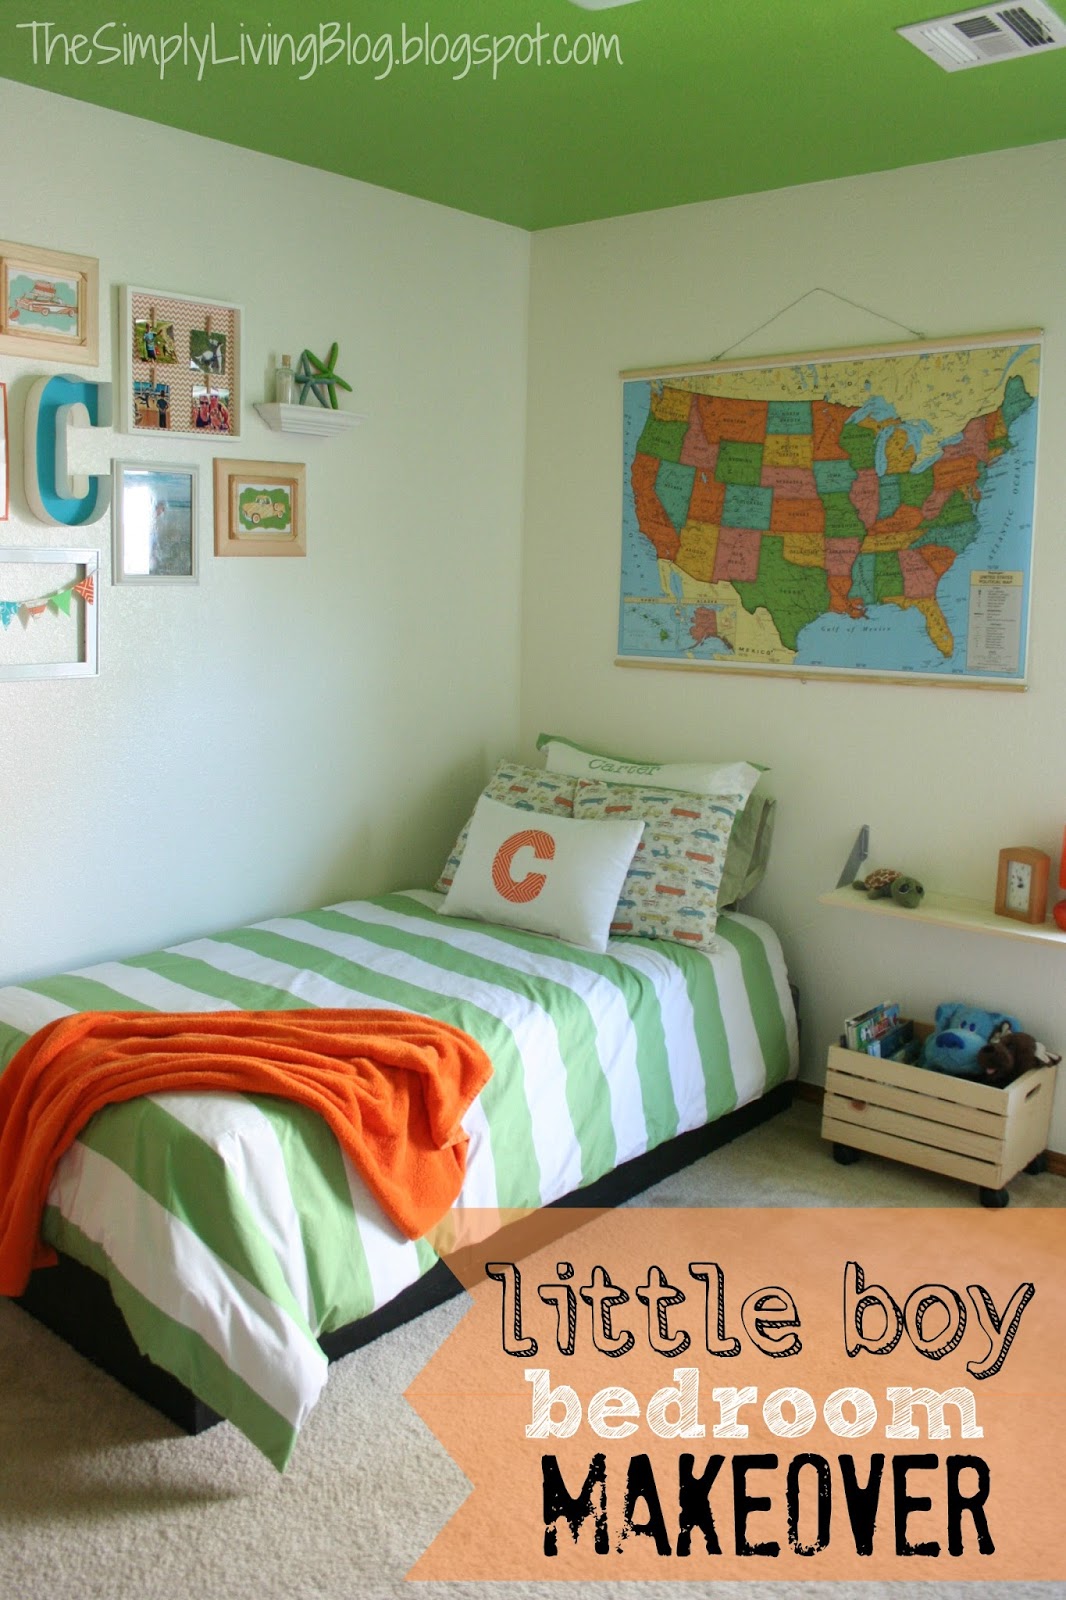 Simply Living : Little Boy Bedroom Makeover